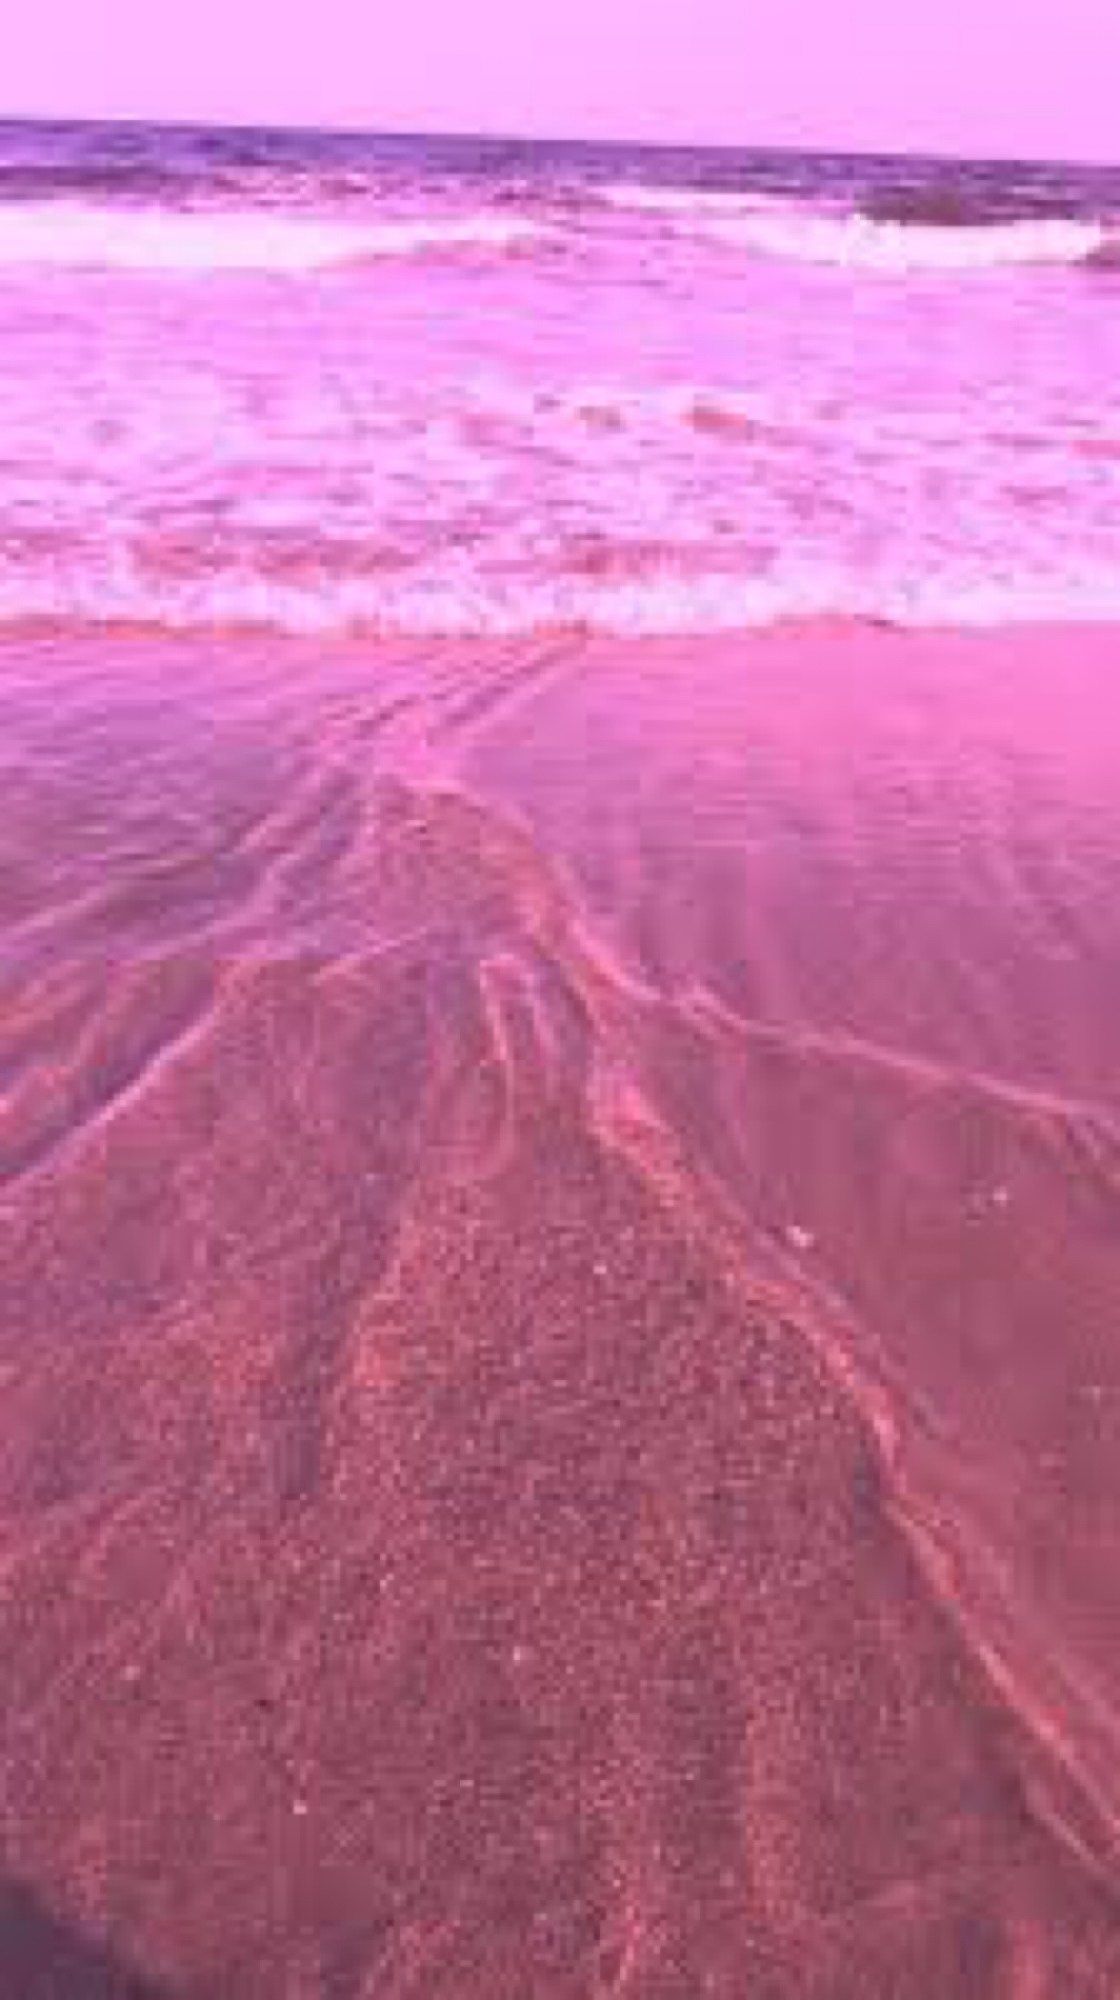 A pink beach with waves and sand - Beach